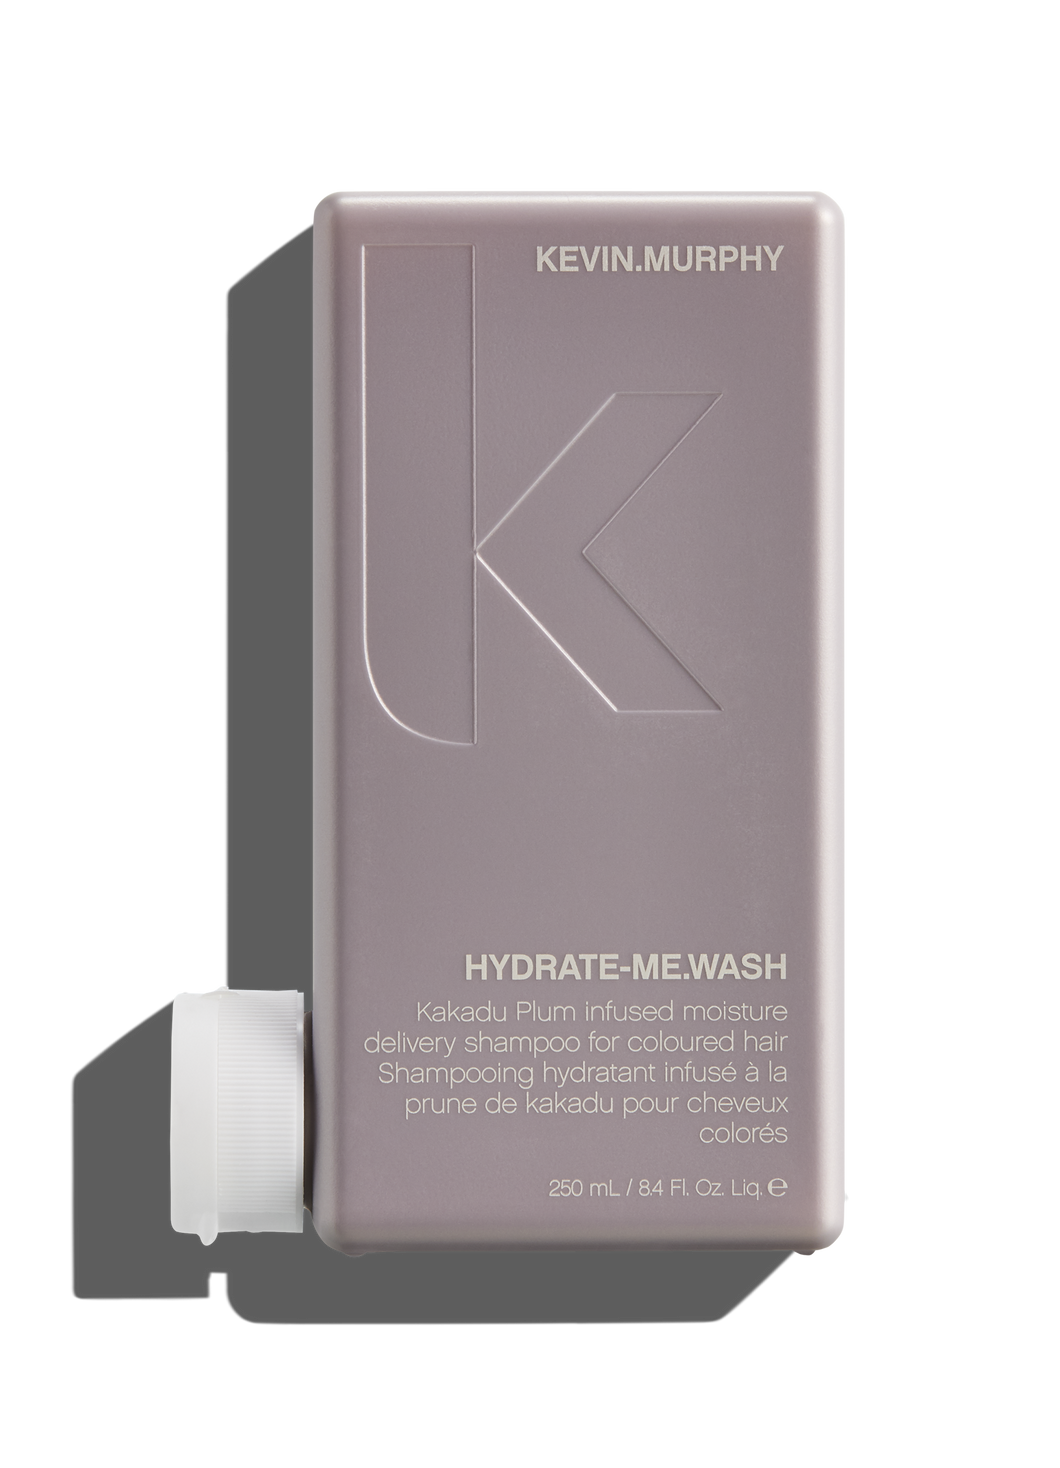 Kevin Murphy HYDRATE-ME.WASH 250ml - IN SALON PURCHASE ONLY!!